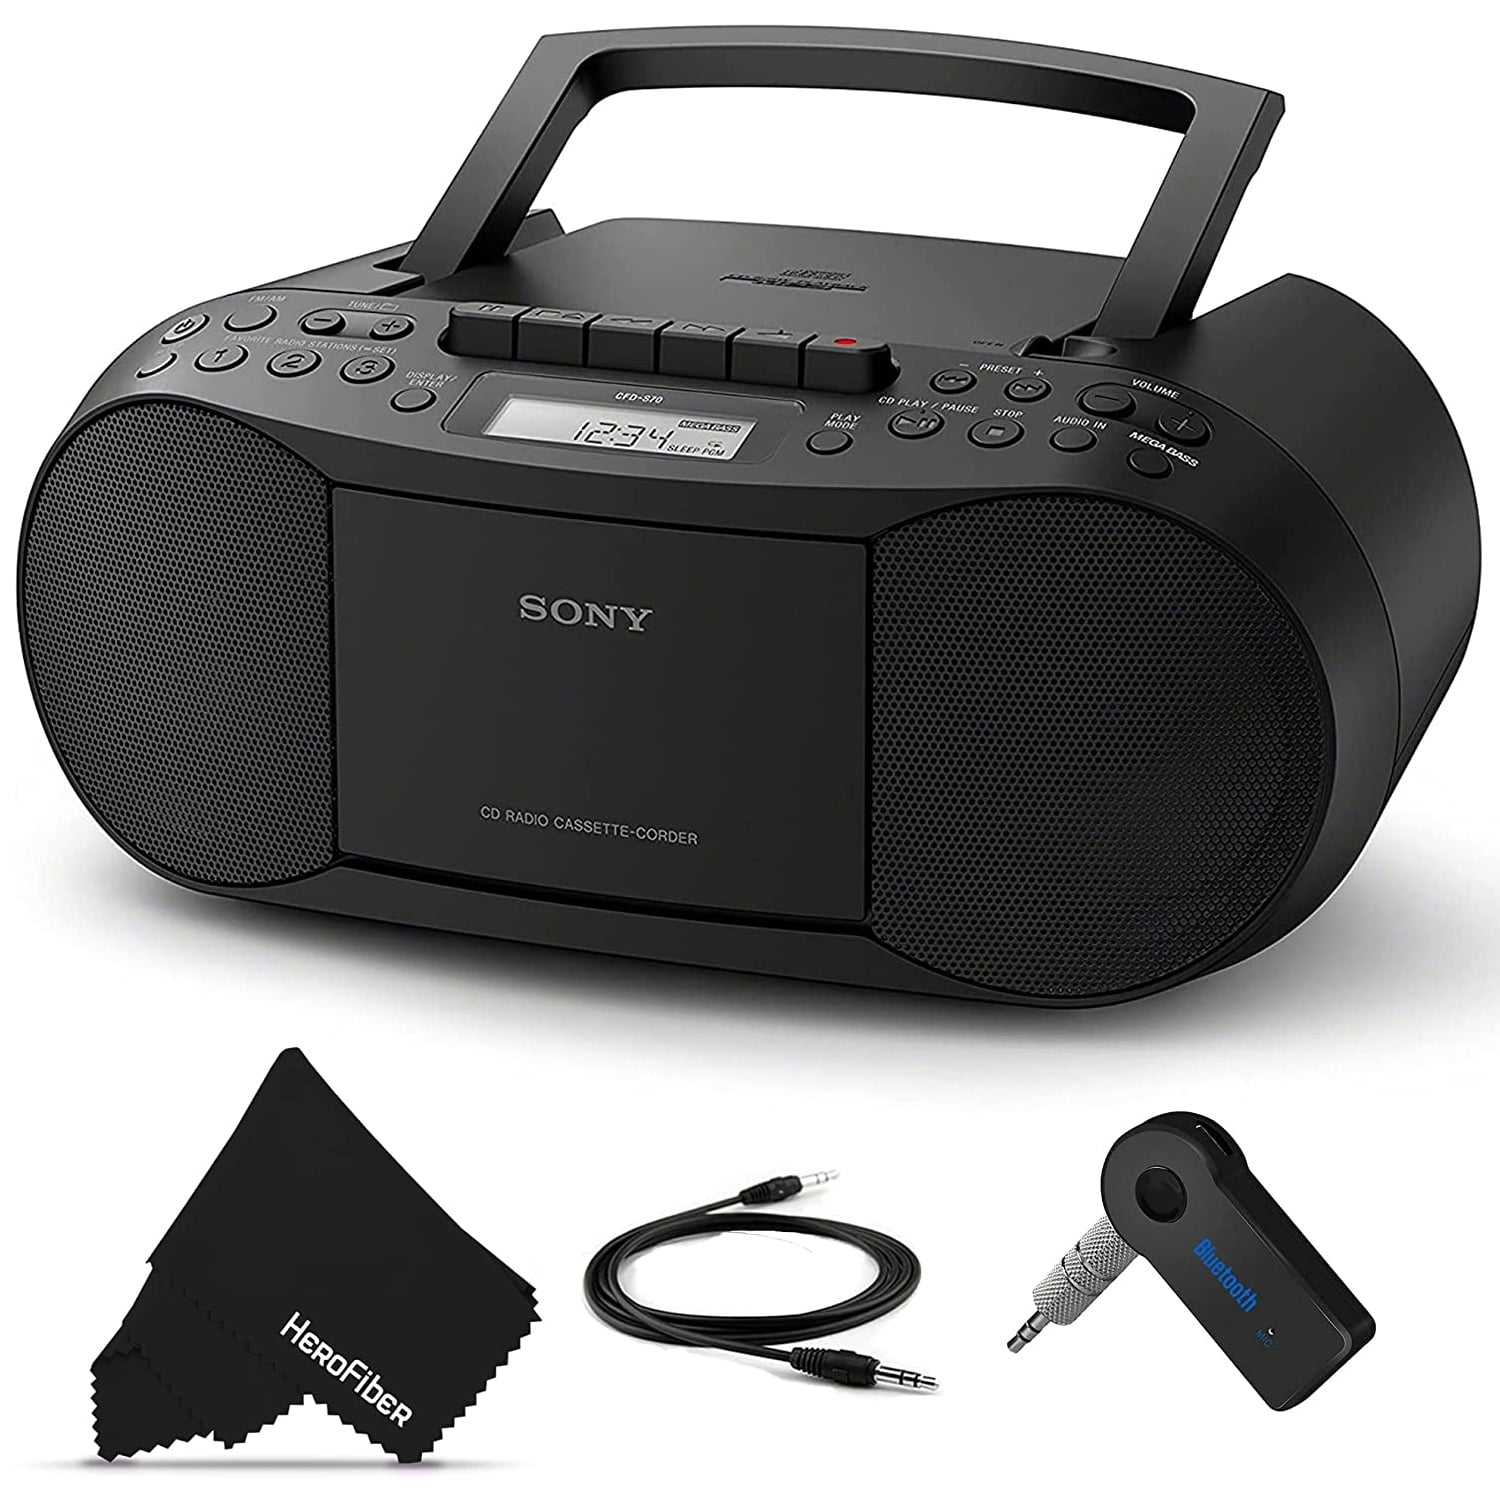 Nacarado calibre Refinería Sony Bluetooth Boombox CD Radio Cassette Player Portable Stereo Combo with  AM/FM Radio, Tape Player and Recorder & Bluetooth Receiver | Home Radio or  for the Beach | Includes Aux Cable, Cleaning